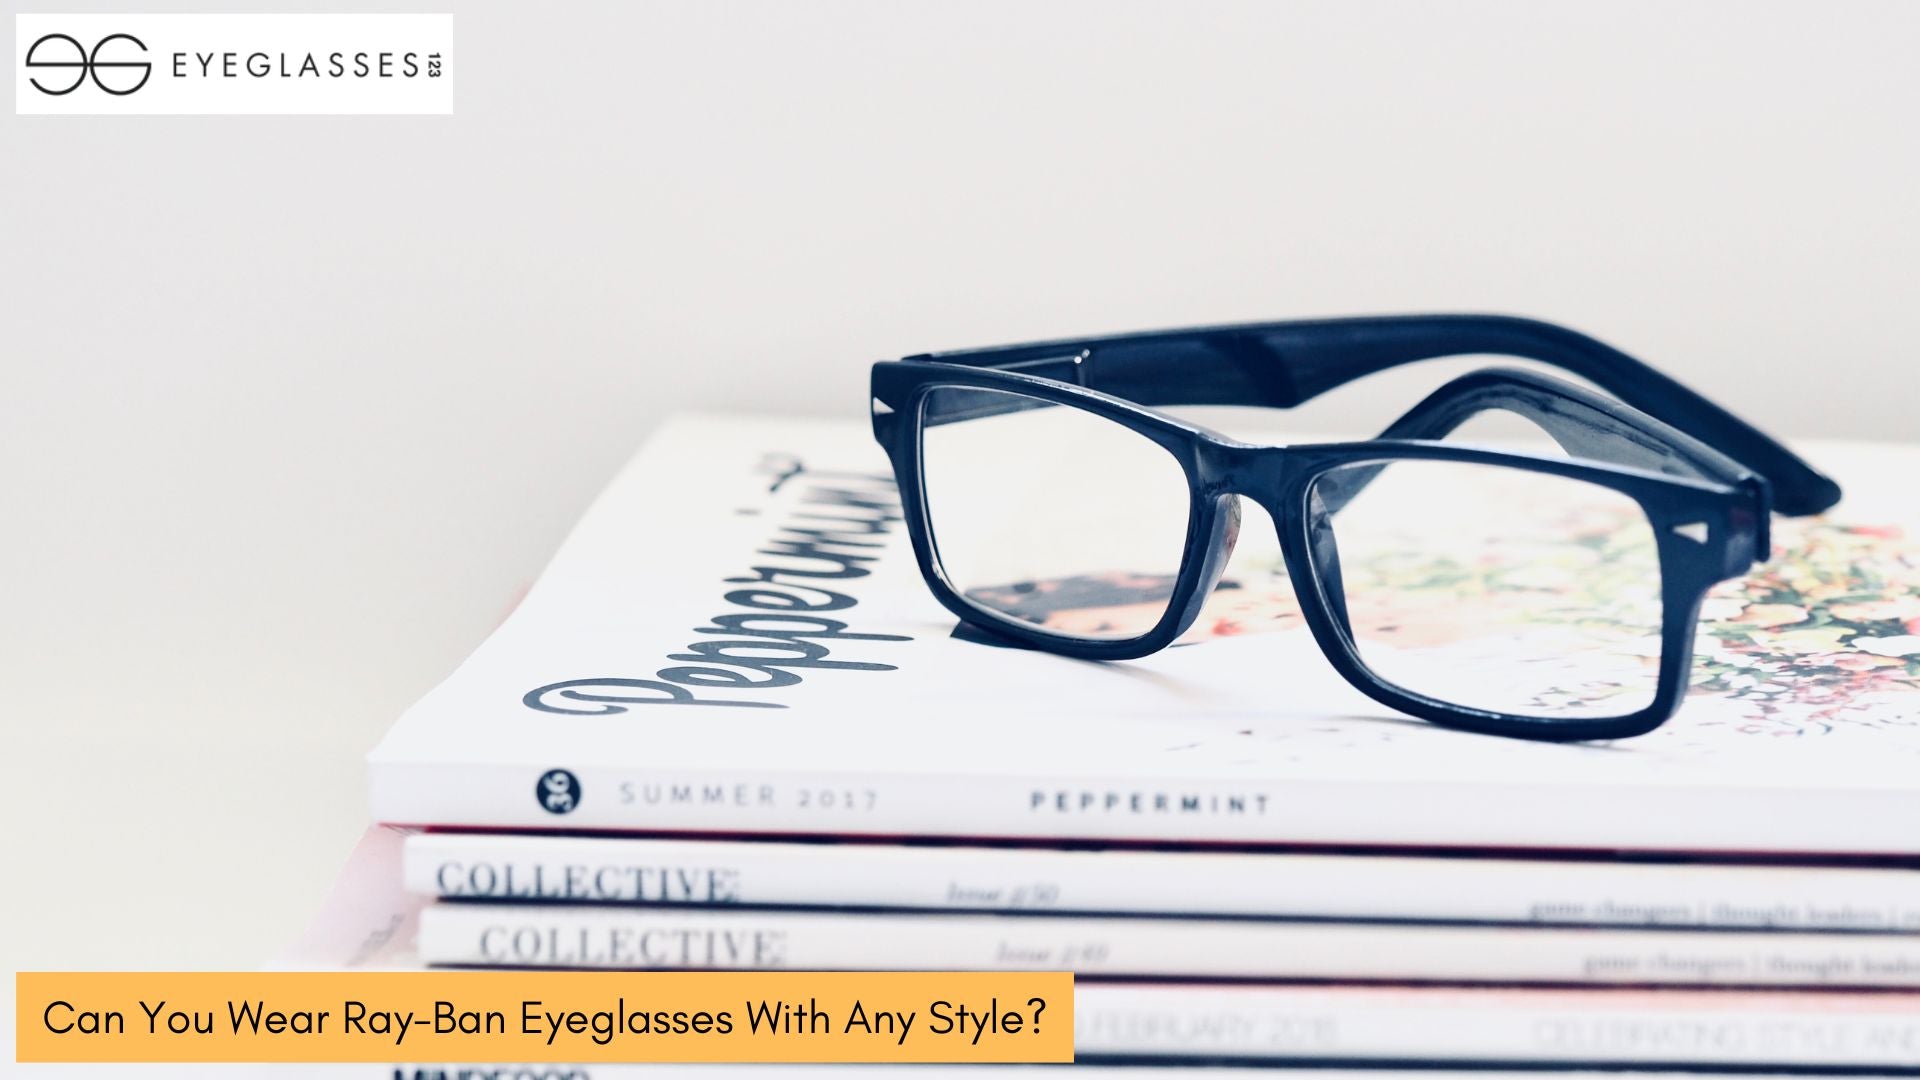 Can You Wear Ray-Ban Eyeglasses With Any Style?